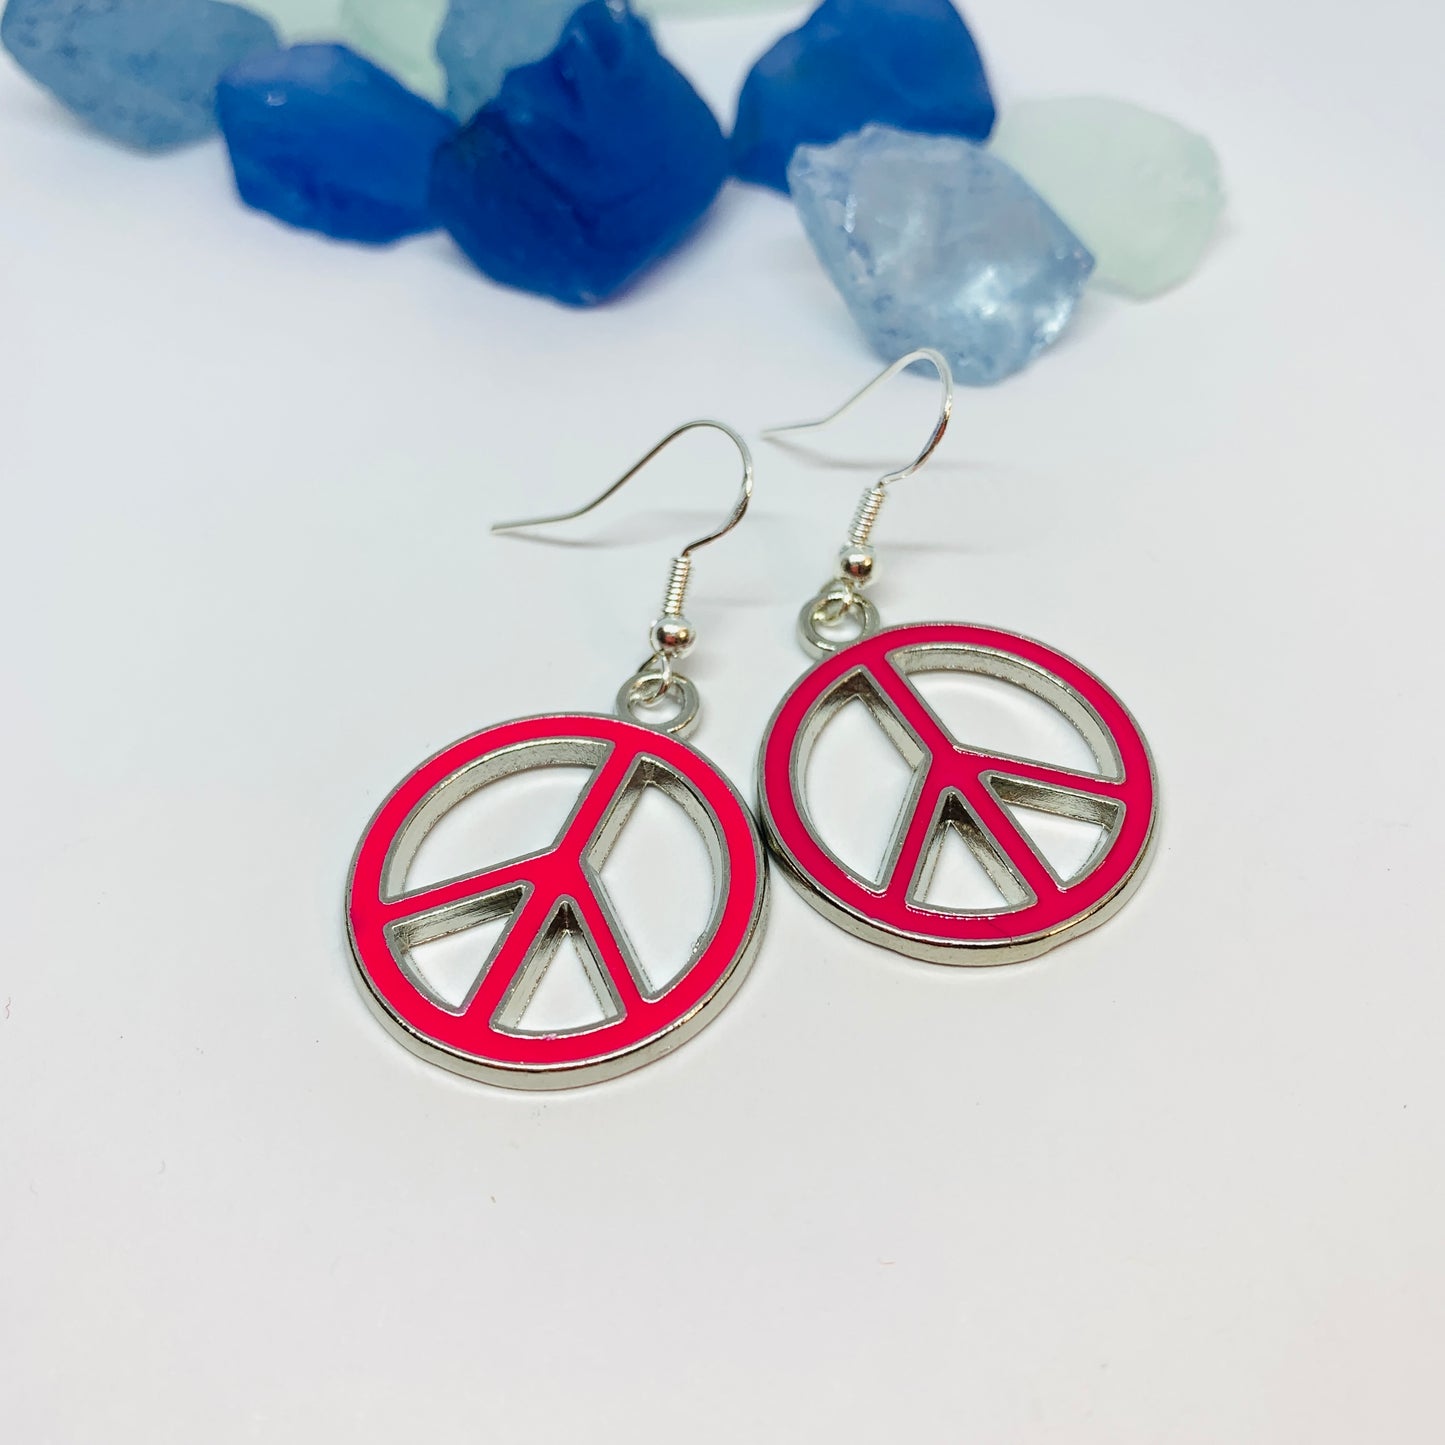 Peace Signs Pink Enamel Earrings with Silver Wires and Backs | Make Love Not War Earrings | Gifts for Her | Love Earrings | Acceptance Earrings